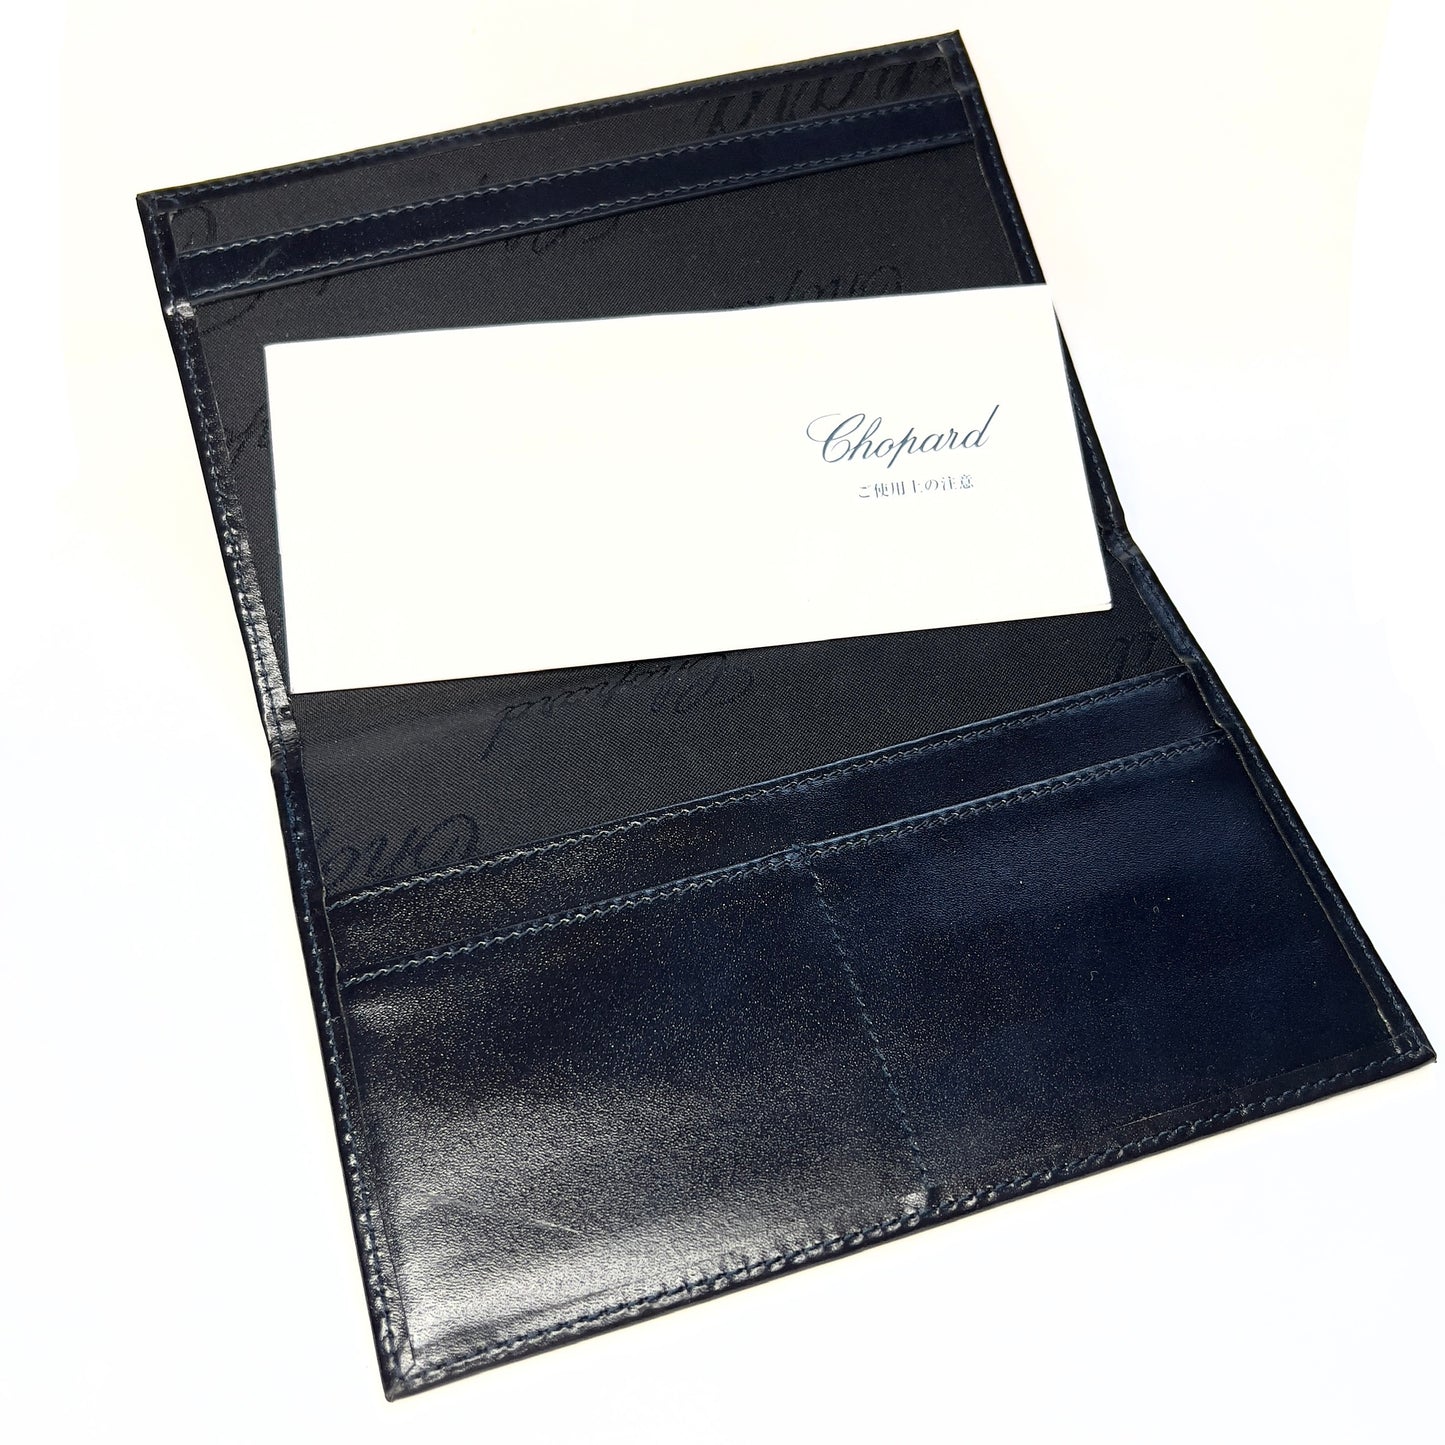 CHOPARD Blue Faux Leather Documents Folder 6.5x4.25 inches + Booklet